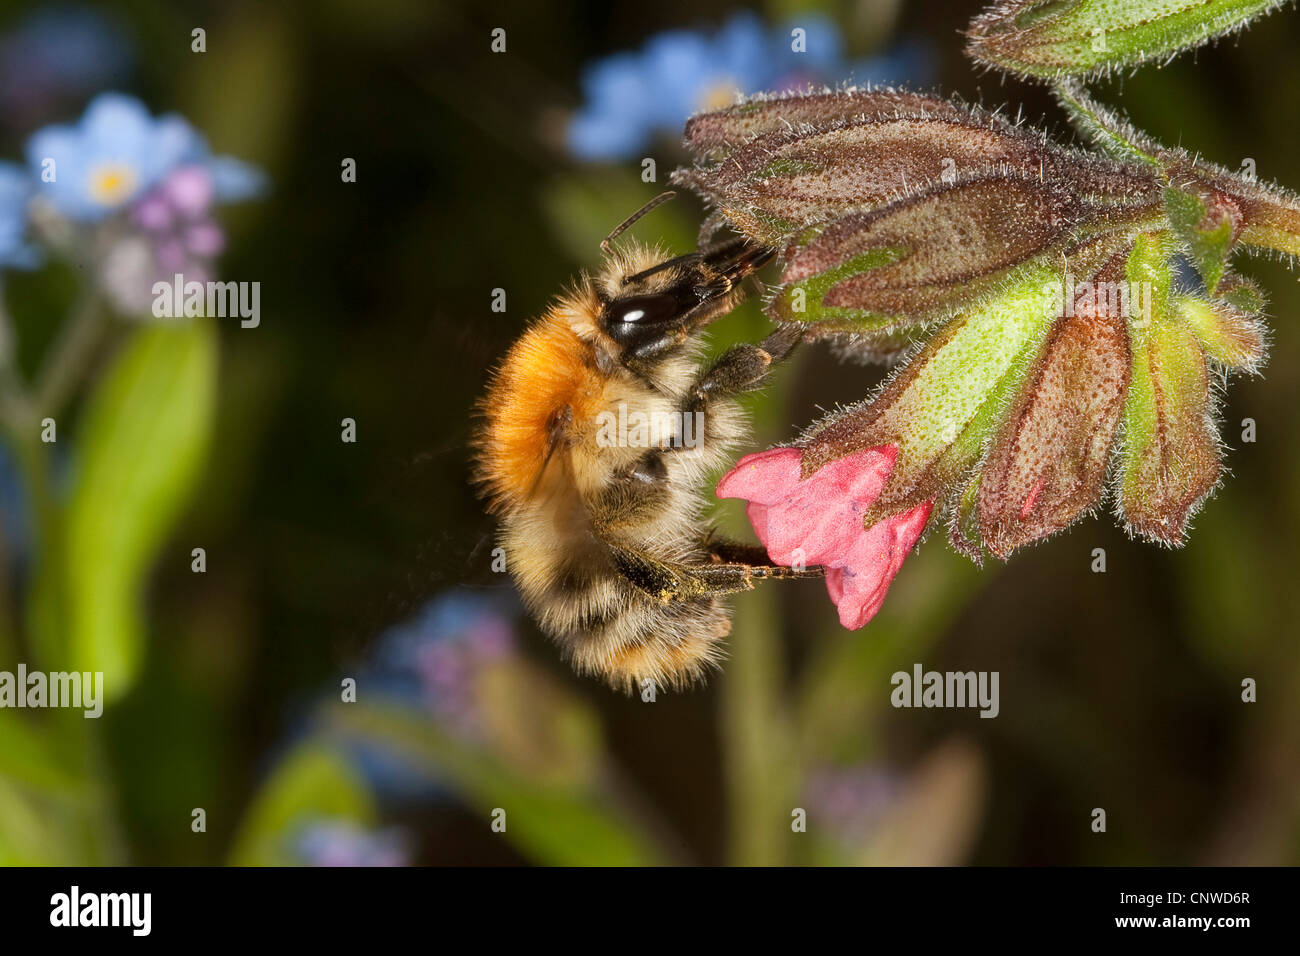 carder bee, common carder bee (Bombus pascuorum, Bombus agrorum), sucking at lungwort, Pulmonaria officinalis, Germany Stock Photo